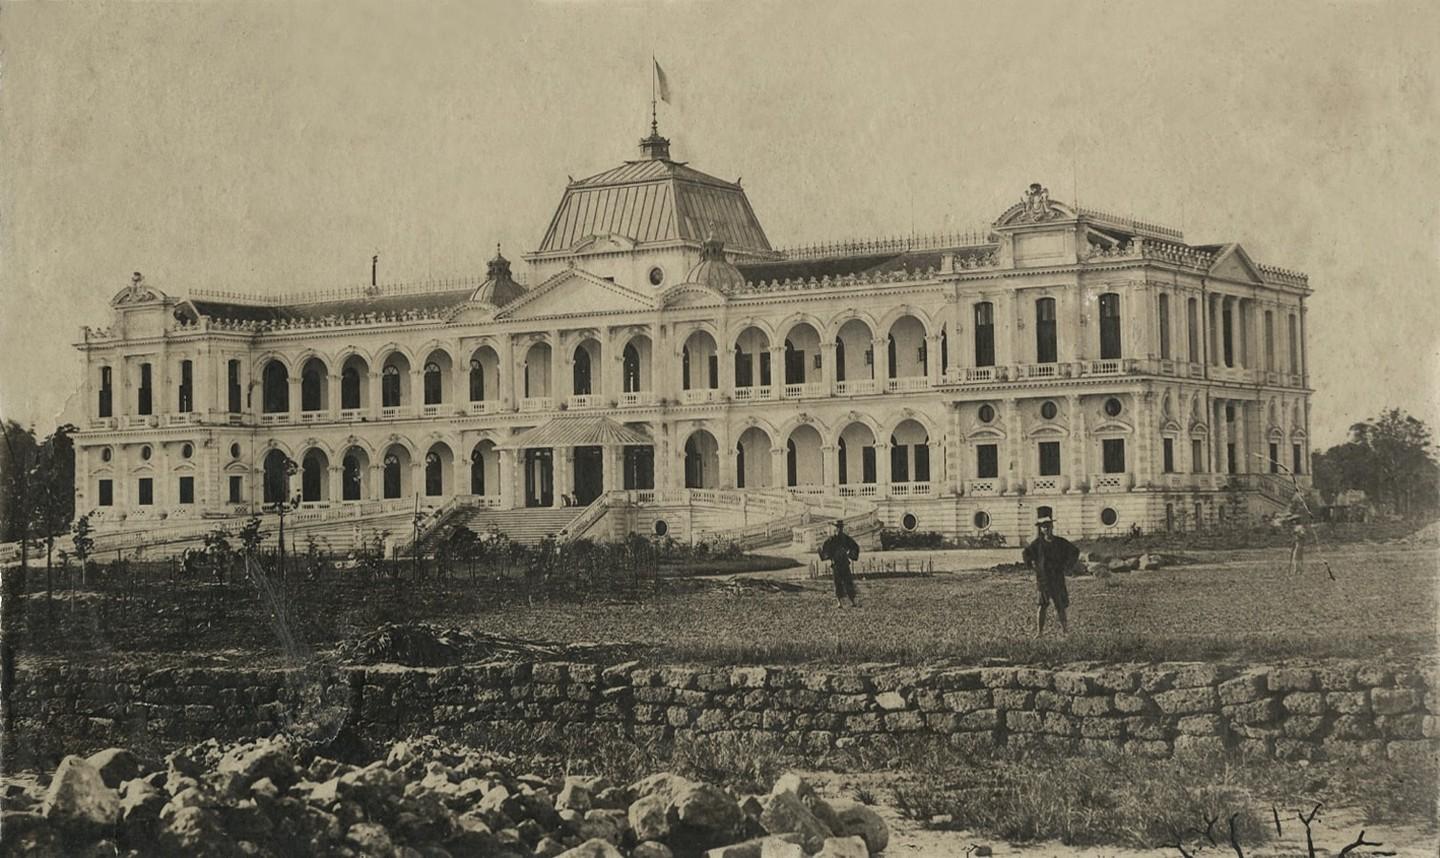 French Governors Palace in Saigon 1875 Original photo by Emile Gsell via Tommy Truong79Flickr